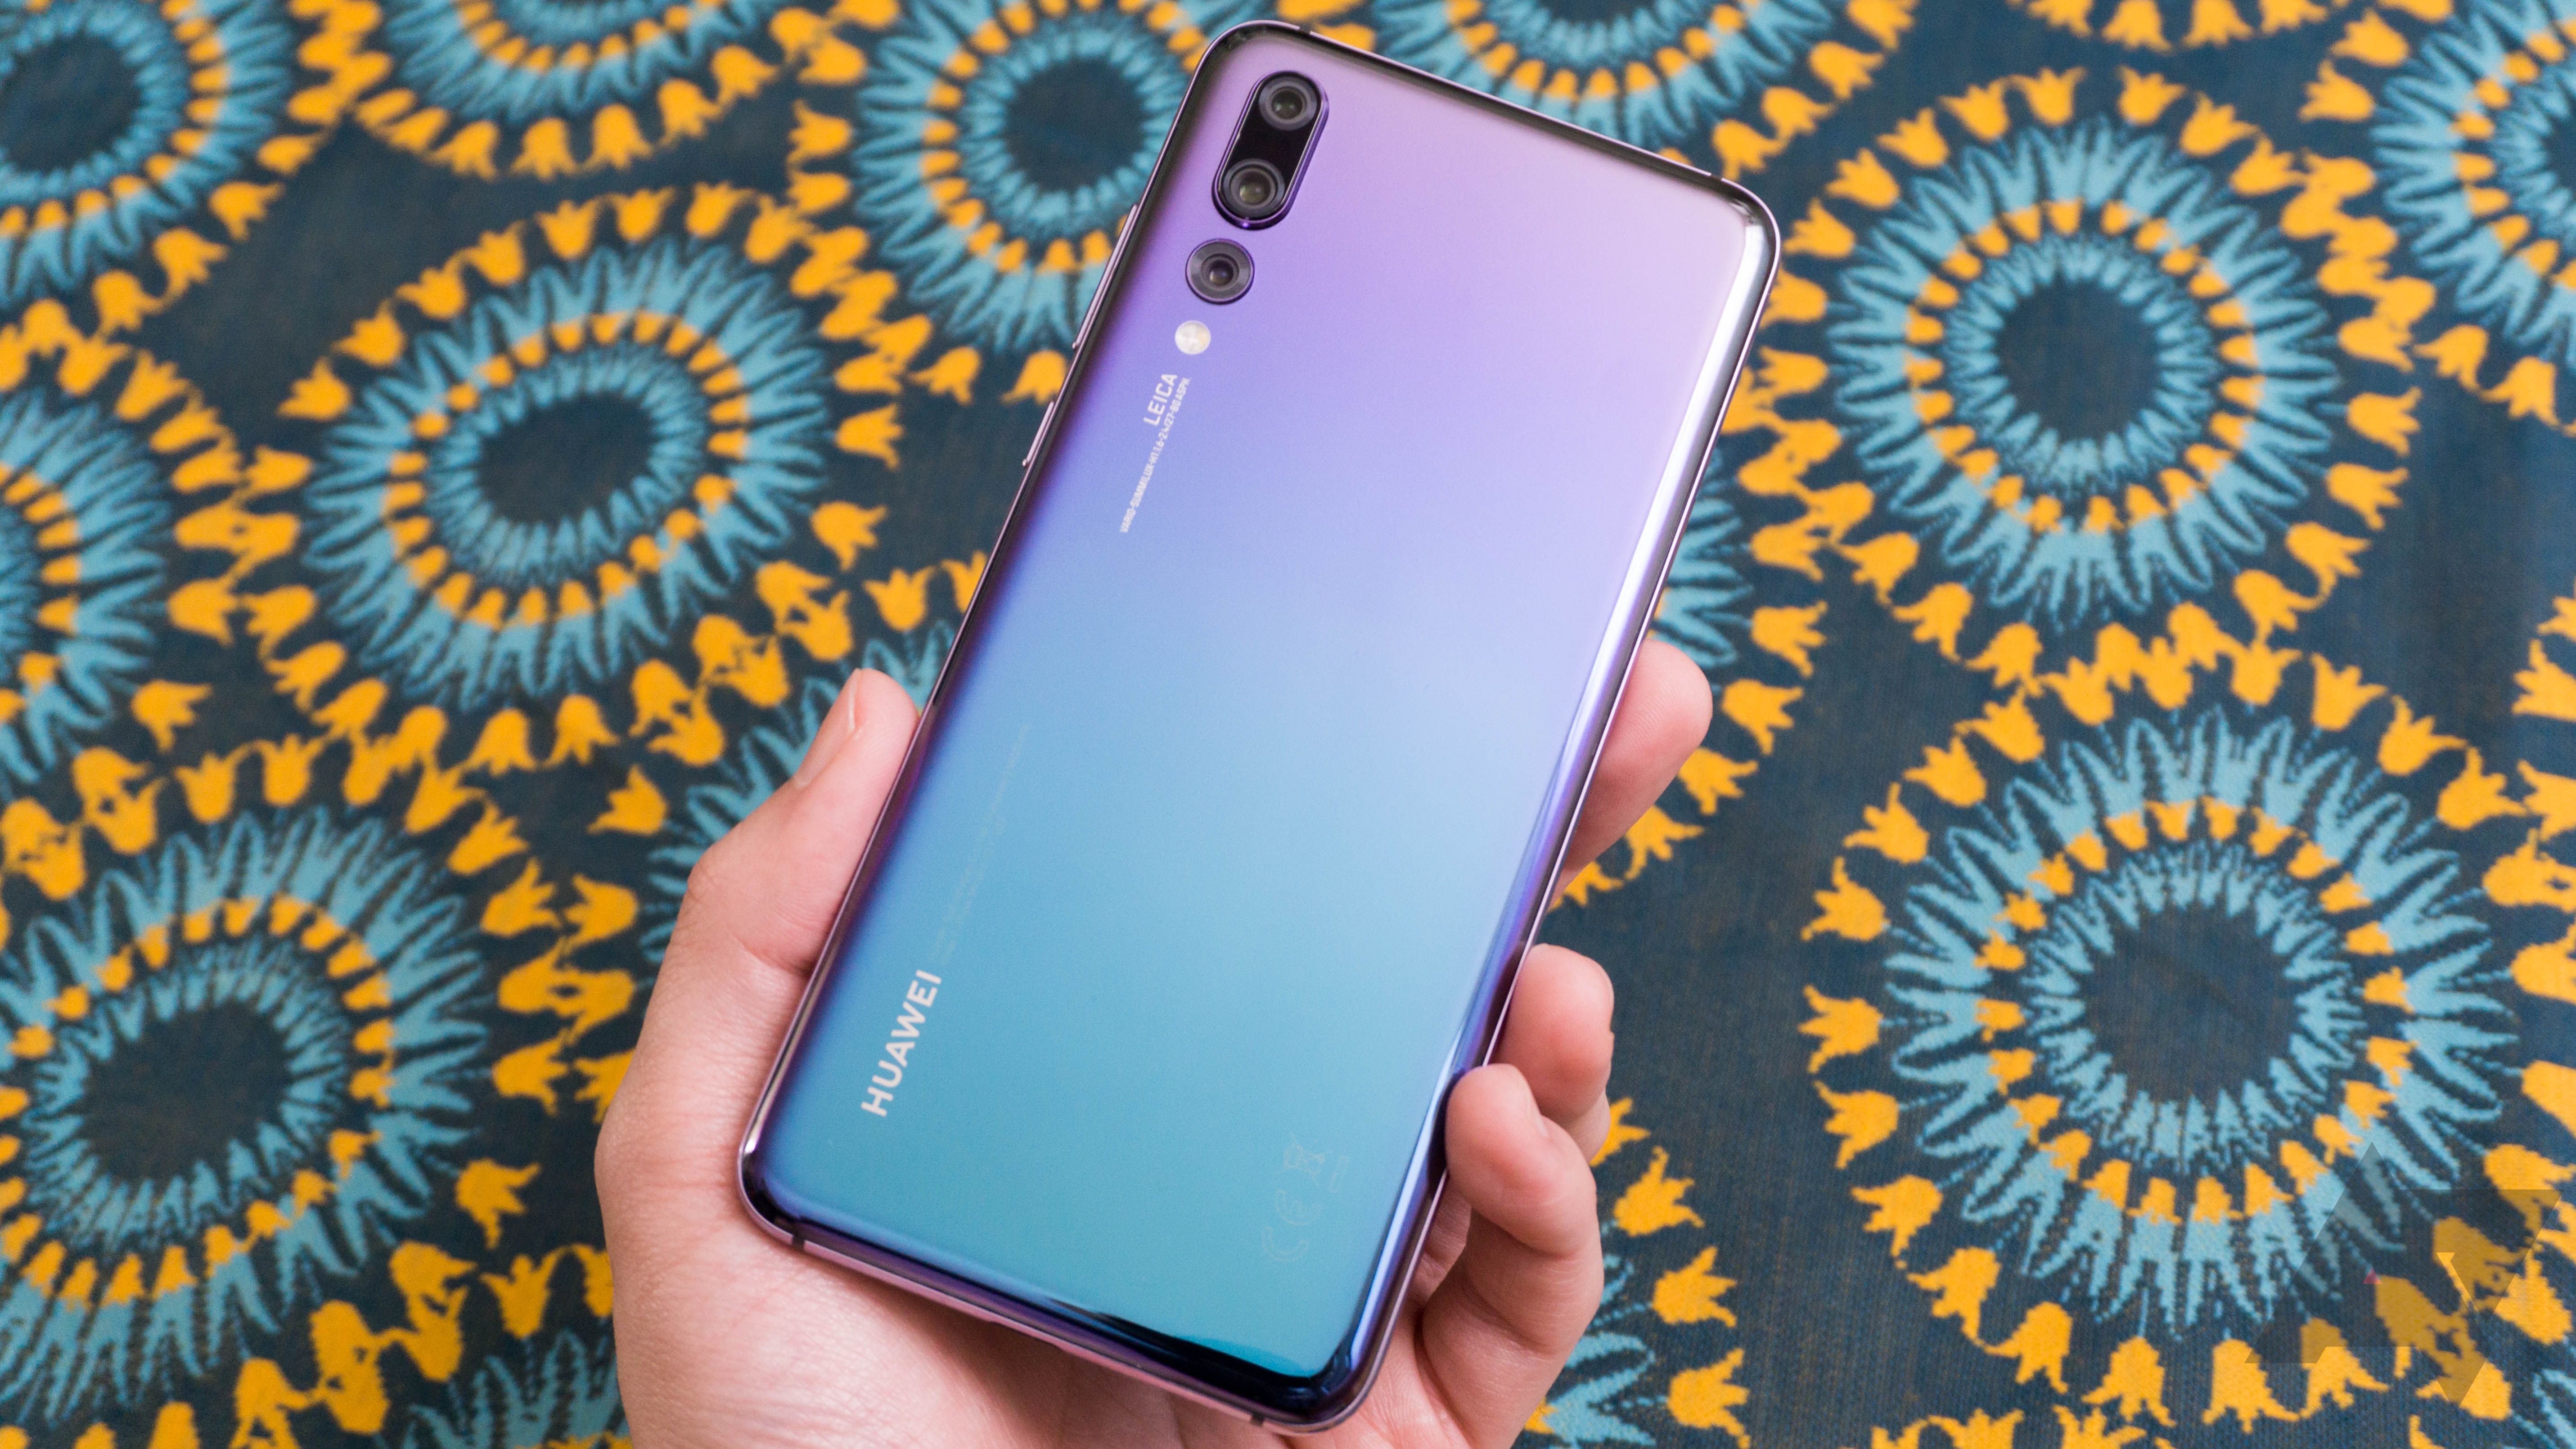 Huawei P20 Pro review: This phone has it all, even things you don't want